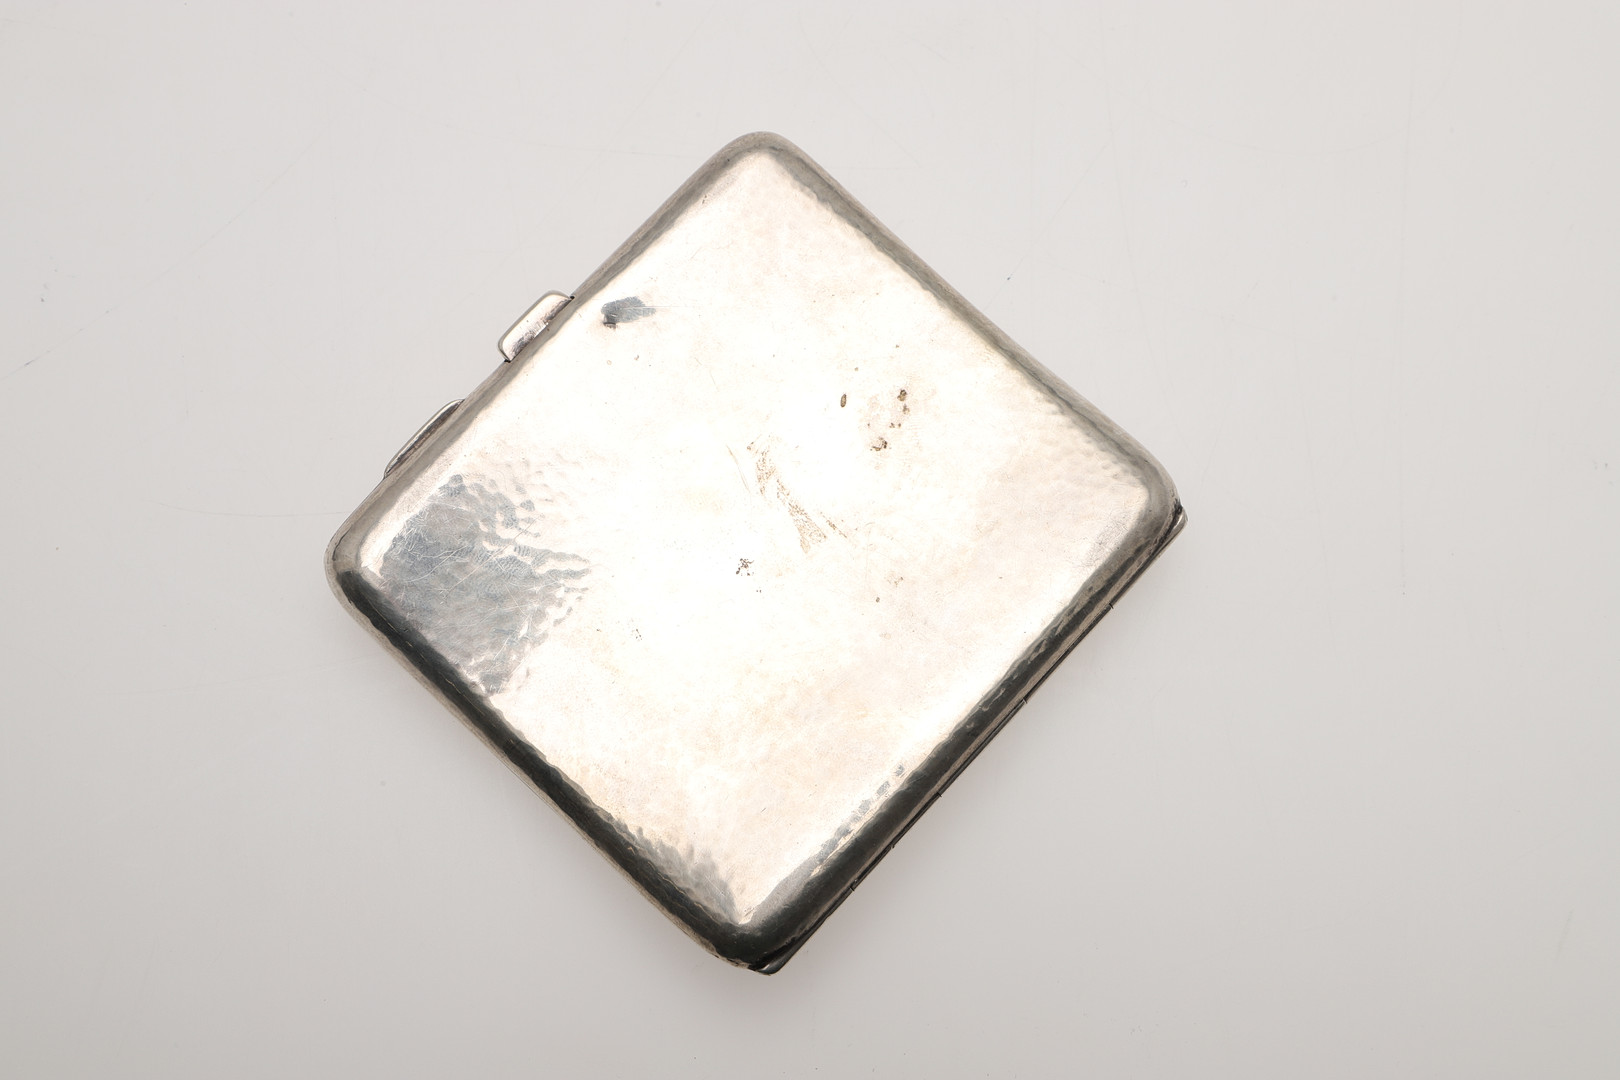 AN ARTS & CRAFTS SILVER CIGARETTE CASE, BY OMAR RAMSDEN & ALWYN CARR. - Image 2 of 4